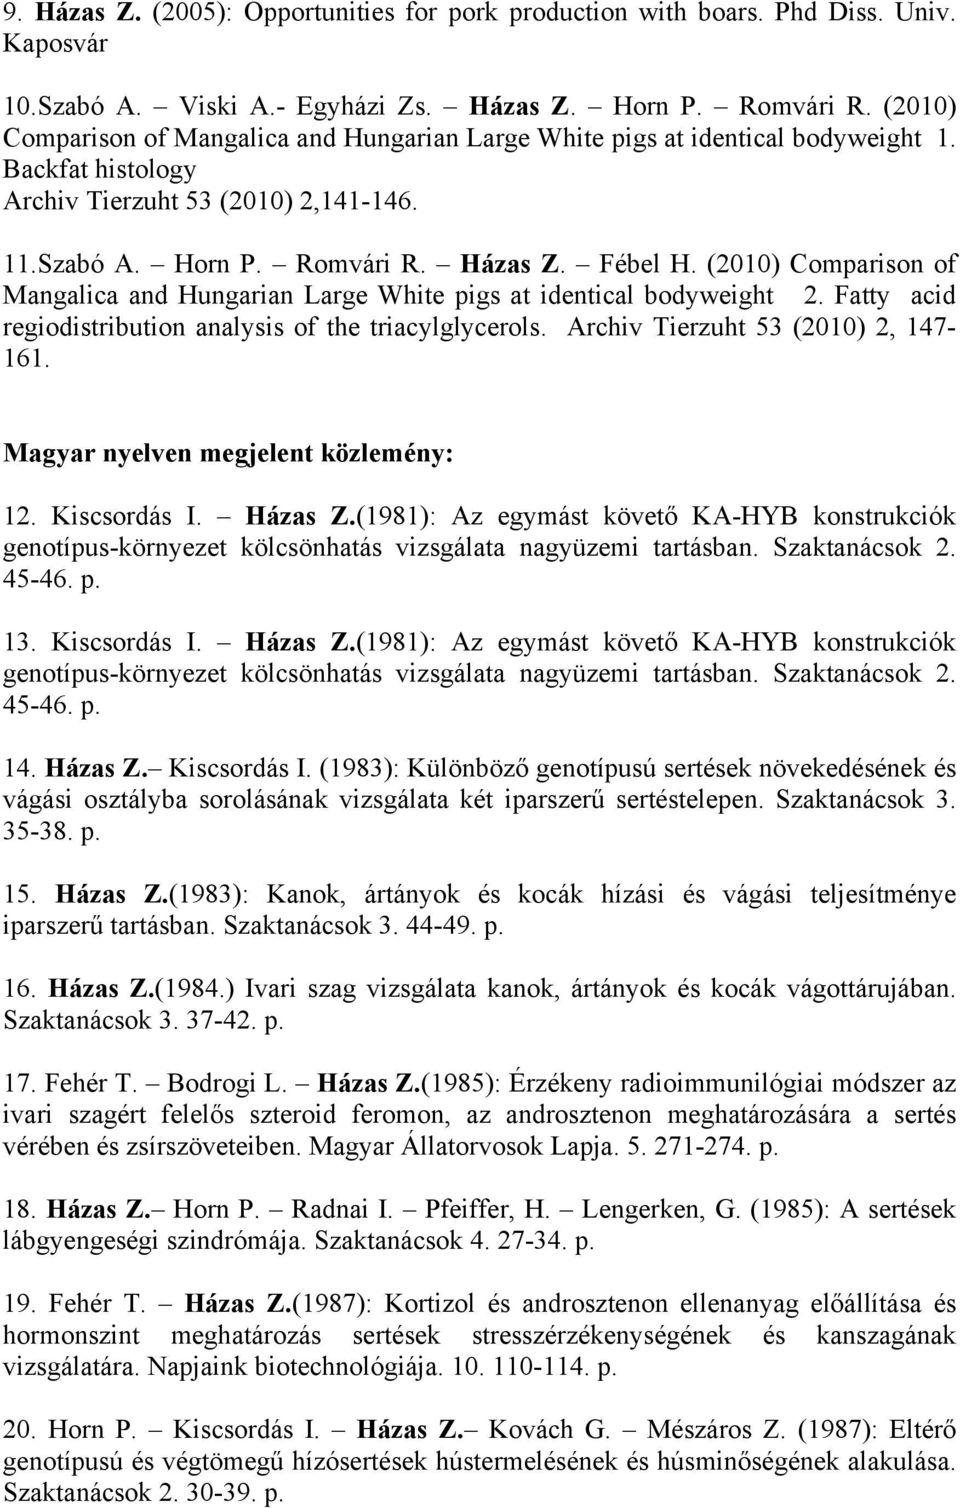 (2010) Comparison of Mangalica and Hungarian Large White pigs at identical bodyweight 2. Fatty acid regiodistribution analysis of the triacylglycerols. Archiv Tierzuht 53 (2010) 2, 147-161.